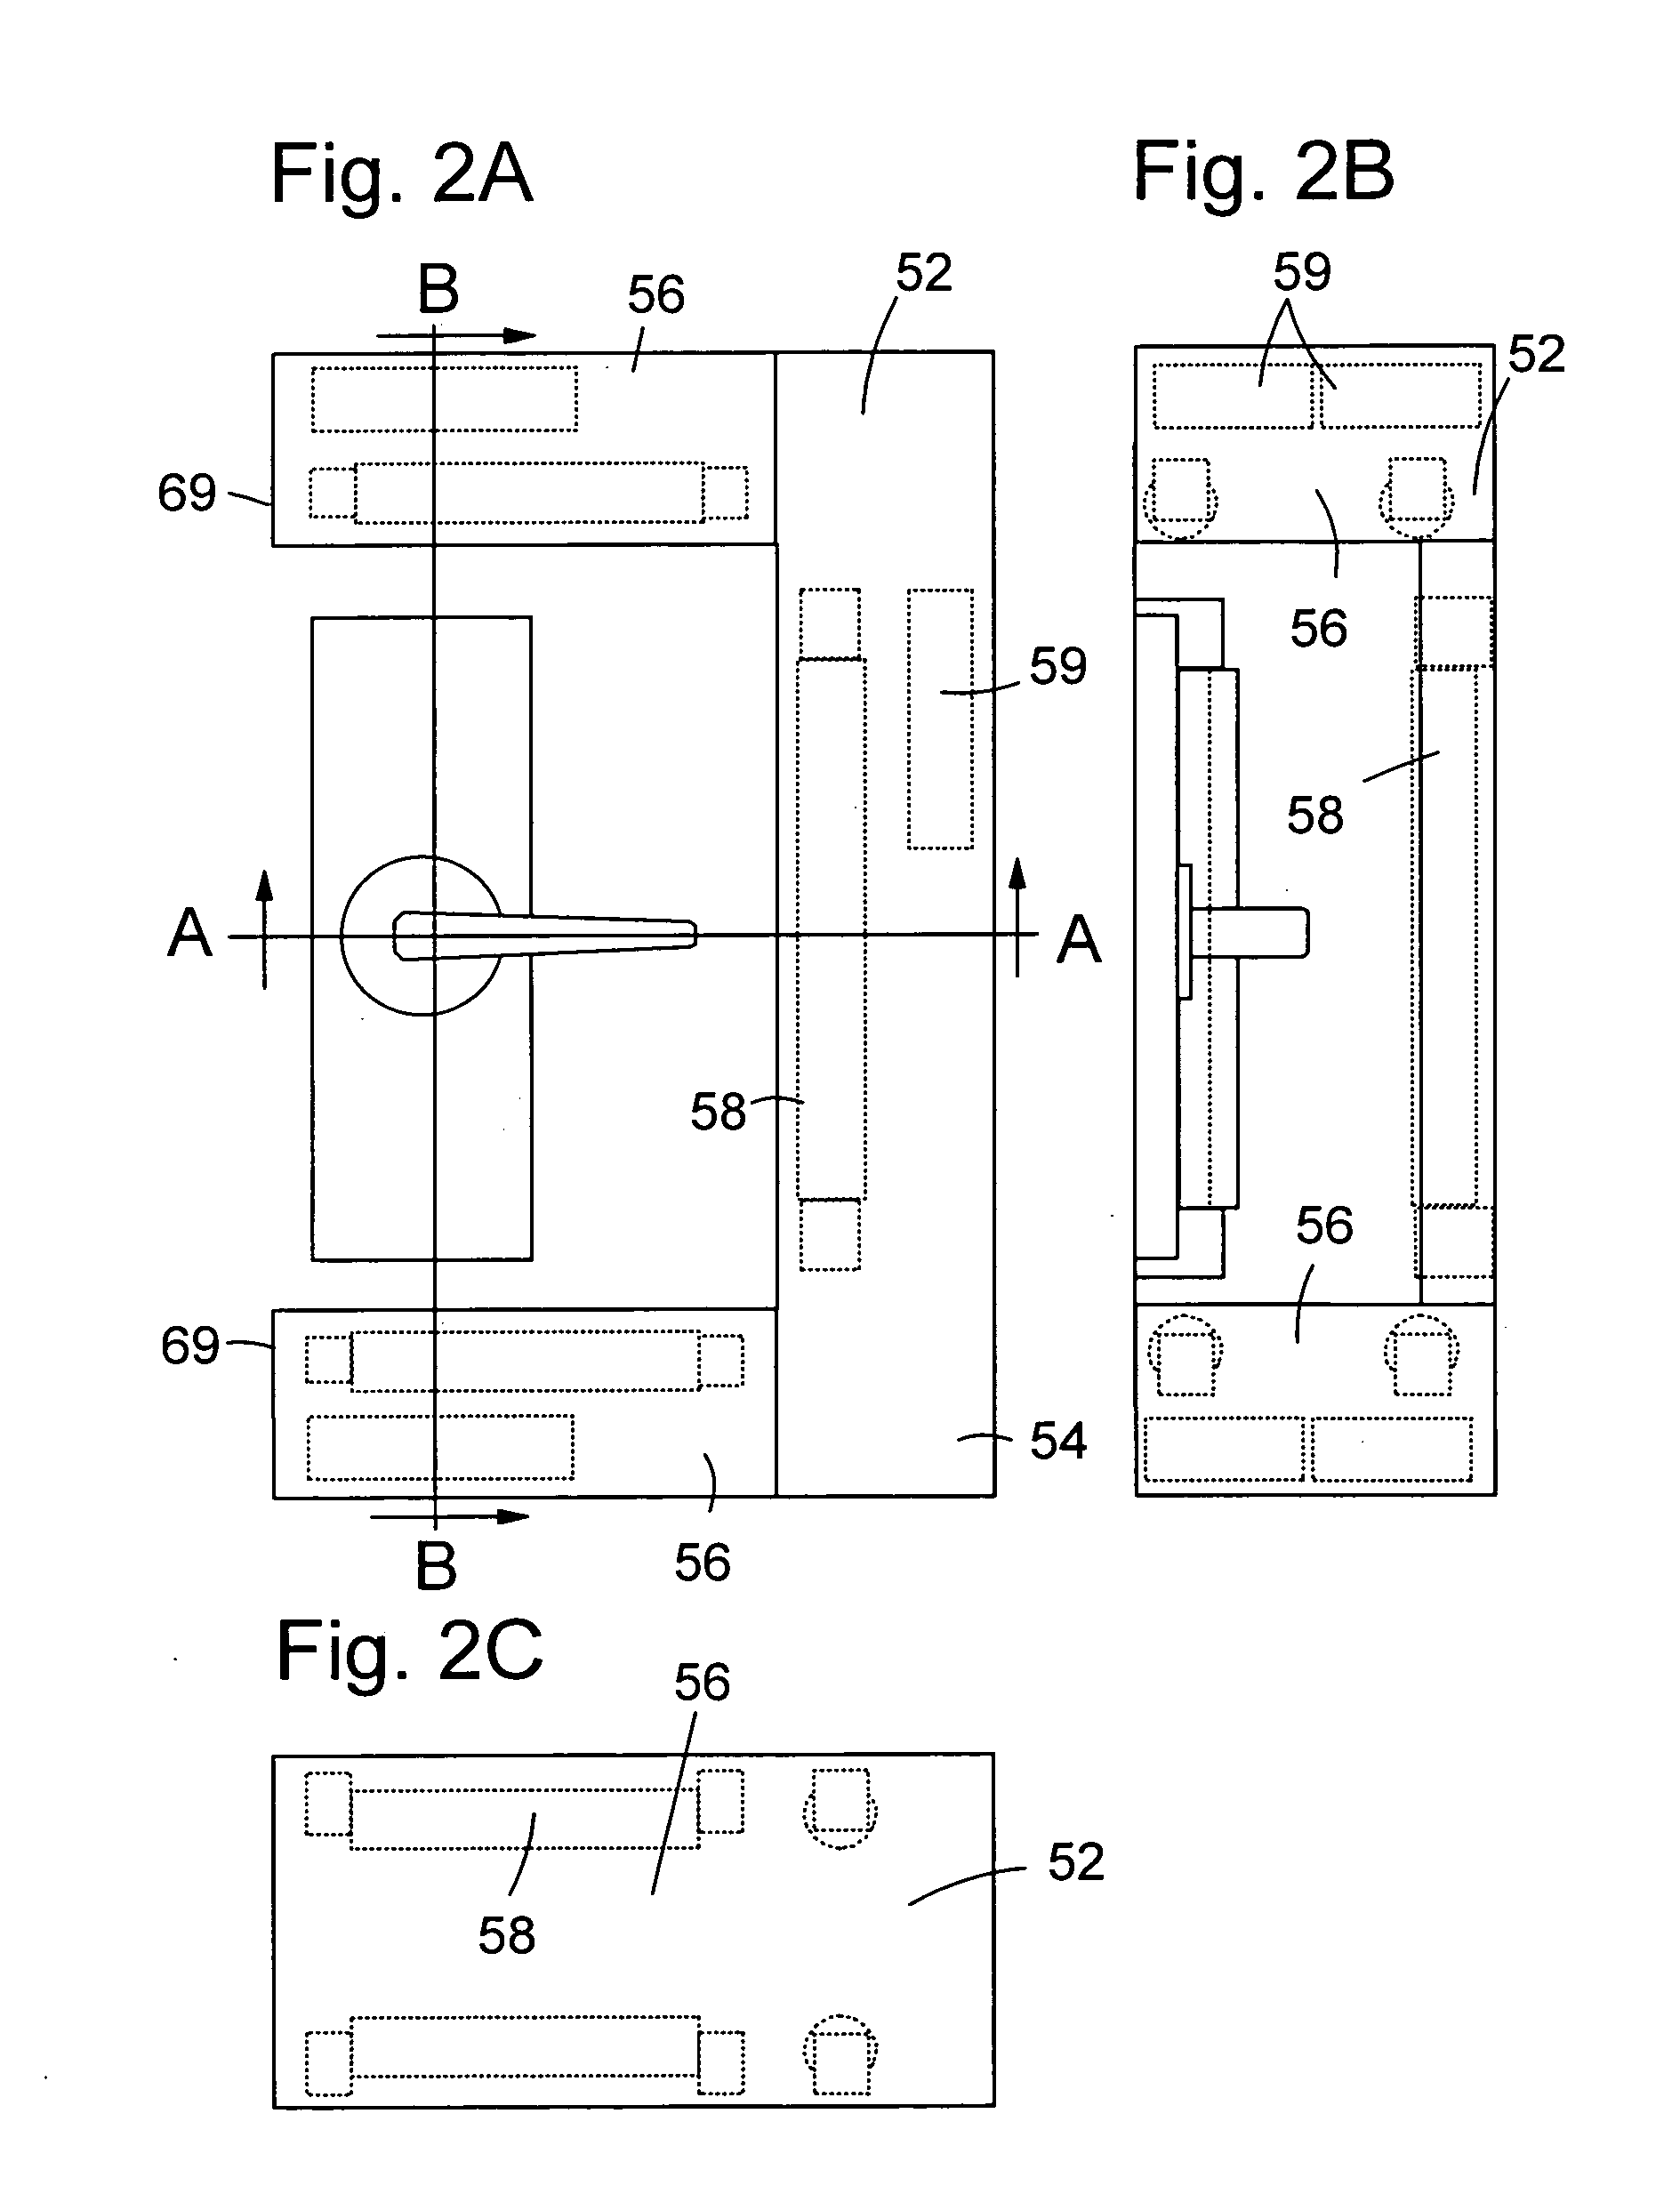 Irradiation system for door handle